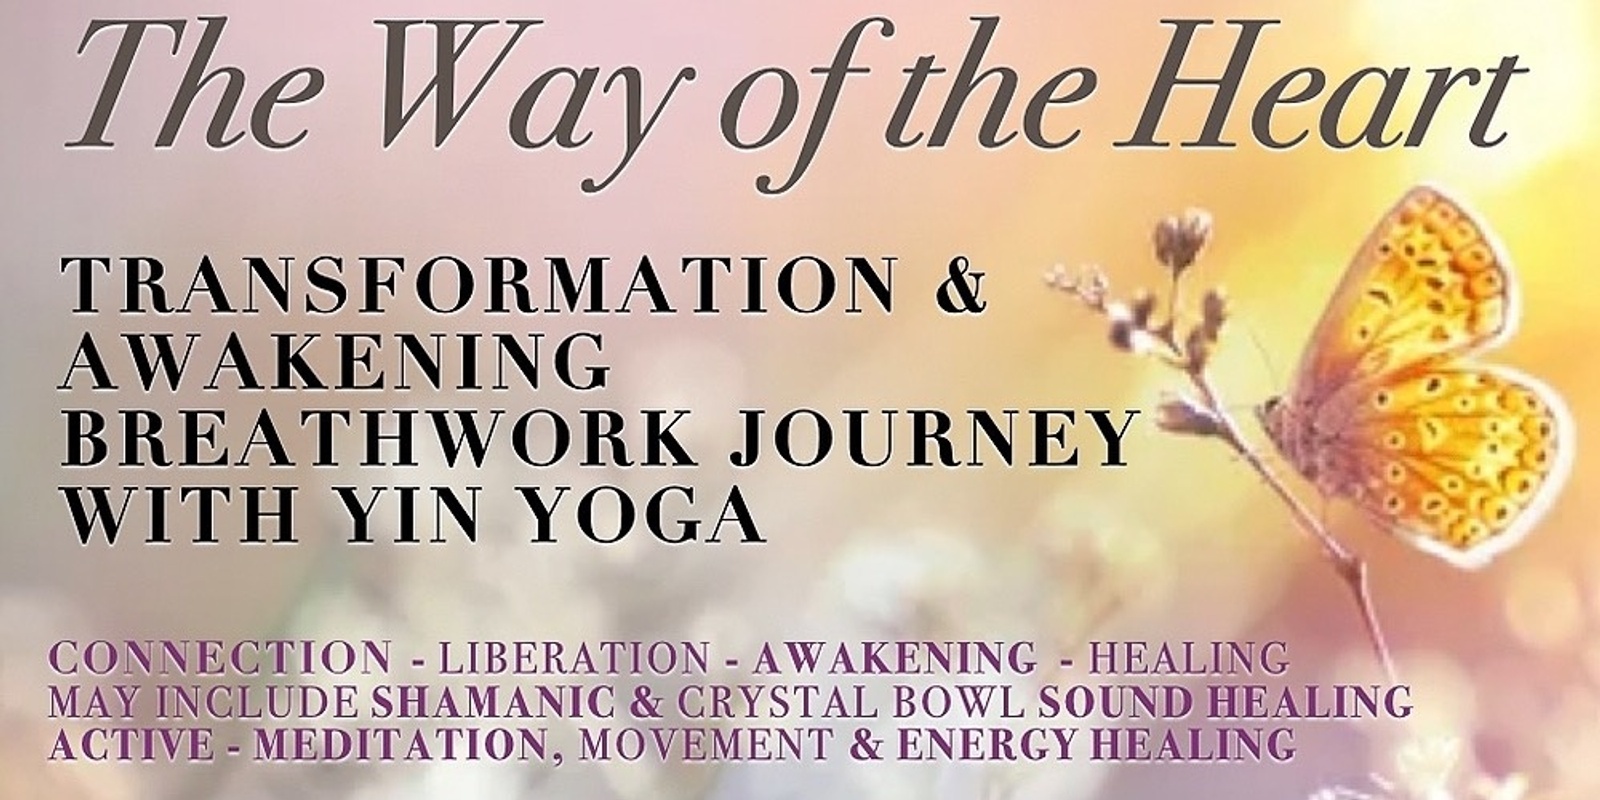 Banner image for The Way of the Heart - Breathwork Journey with Yin Yoga & Movement